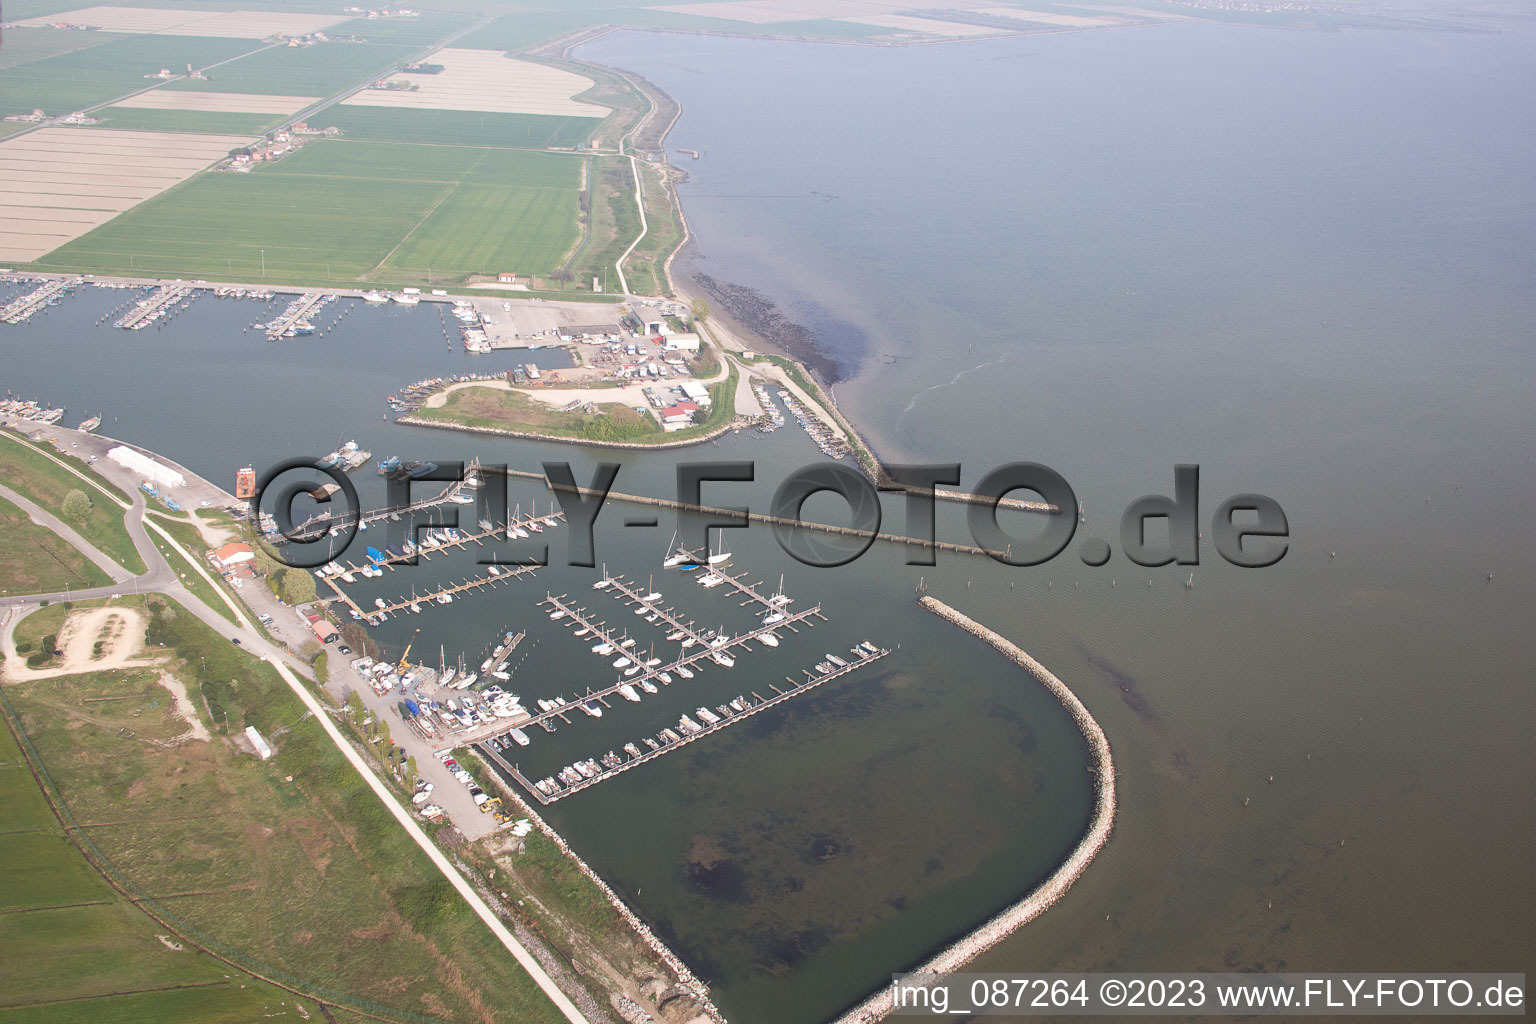 Aerial view of Pleasure boat marina with docks and moorings on the shore area der Adria in Goro in Emilia-Romagna, Italy